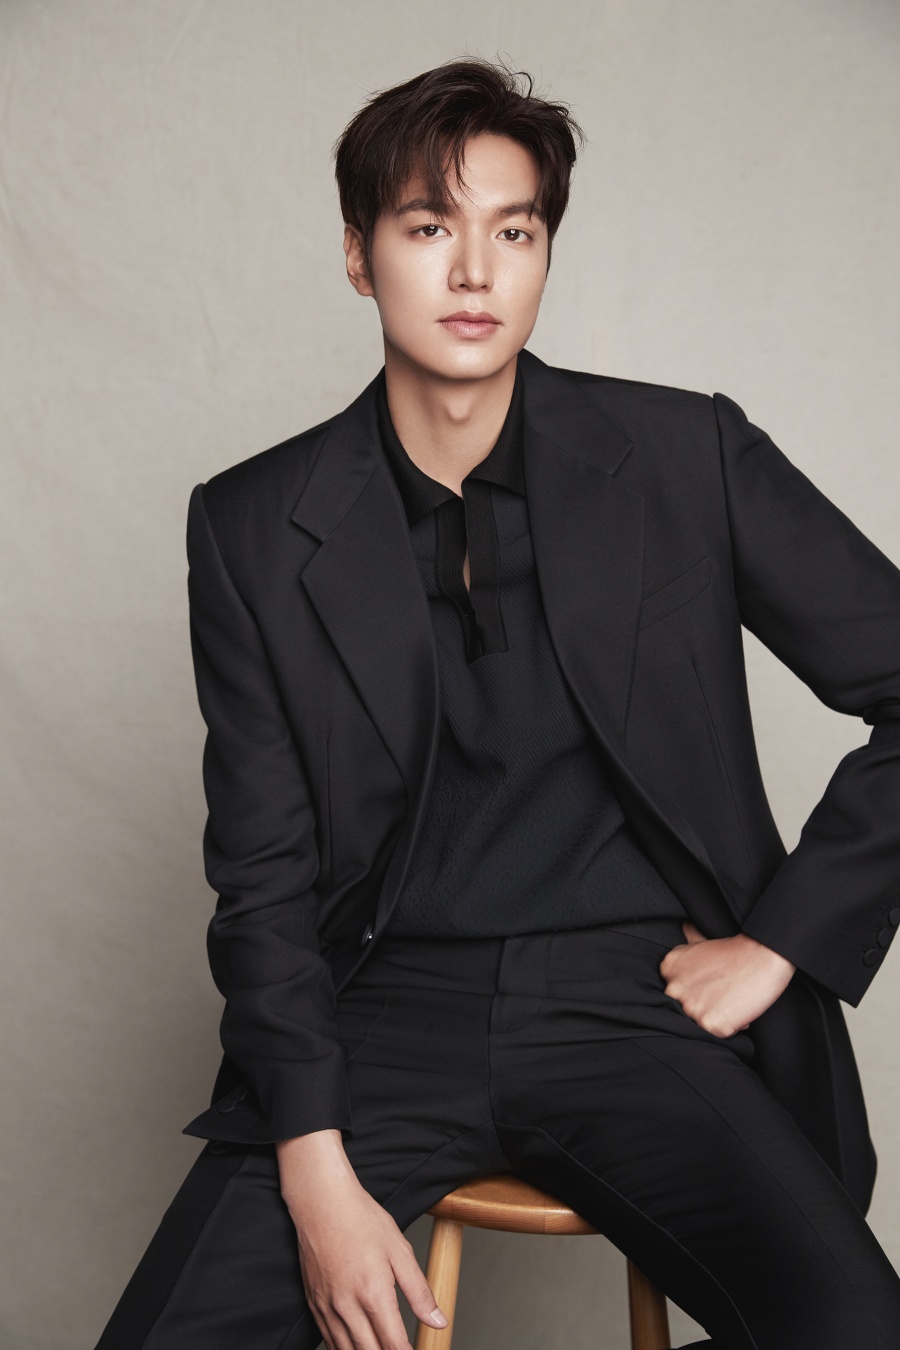 Actor Lee Min-ho SNS Followers exceeded 40 million. According to Lee Min-ho agency MYM Entertainment, Lee Min-ho official Facebook and Instagram Followers exceeded 20 million each, exceeding 40 million people.Lee Min-ho is the first to surpass 20 million Followers in both SNSs at the same time throughout the domestic singer, Actor.Lee Min-ho achieved 20 million Followers on Facebook on the 18th, and also surpassed 20 million Followers on Instagram on the 4th.The agency posted a photo commemorating 20 million and thanked the fans. In the public photos, Lee Min-ho caught the attention of the fans with overwhelming visuals and eyes.Lee Min-hos influence on major social media is beyond imagination.On the 4th, Weibo, the representative SNS of China, has 28.63 million followers, and Twitter has exceeded 3 million. It is the only record among Korean stars.Lee Min-ho was ranked third among Asian celebrities and first among Korean stars, receiving more than 104 million votes in 100 Most Attractive Celebrities in Asia in 2020 released in King Choice in September.It is also a figure that Lee Min-ho has proved to be popular in the former World.The latest, The King: The Lord of Eternity (hereinafter the King), was released simultaneously to the former World through Netflix, the worlds largest OTT, and has made record-breaking achievements.In Netflix Asia, it was selected as the top 10 most viewed content.According to Flix Patrol, which provides a database of video content, The King has been popular in Netflix for 124 days.Lee Min-ho is taking a break after the end of The King and is reviewing his next work.